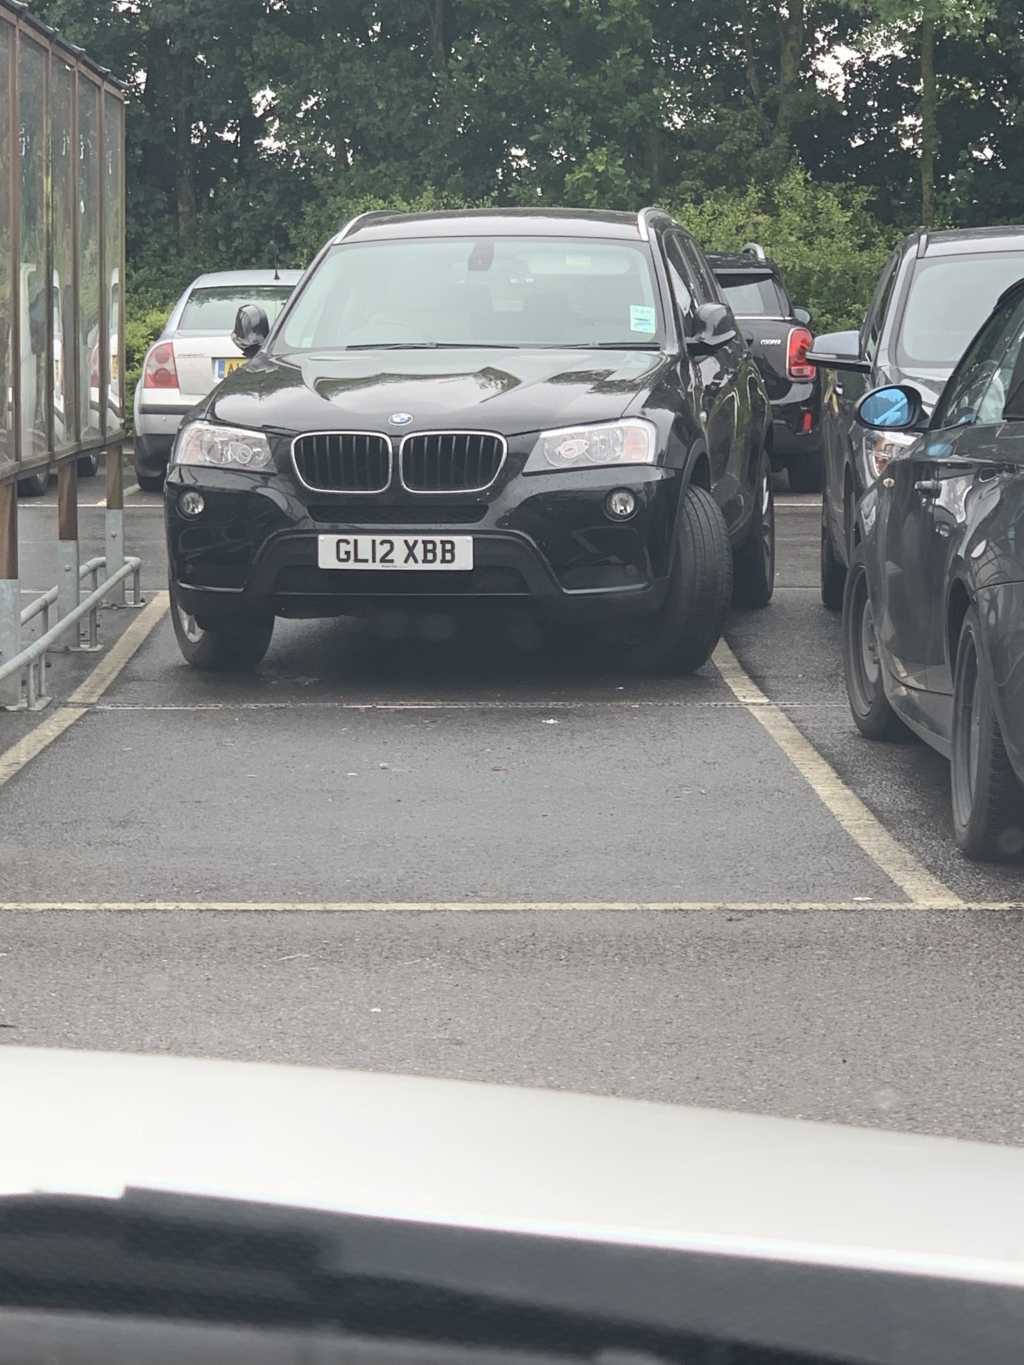 GL12 XBB displaying Inconsiderate Parking